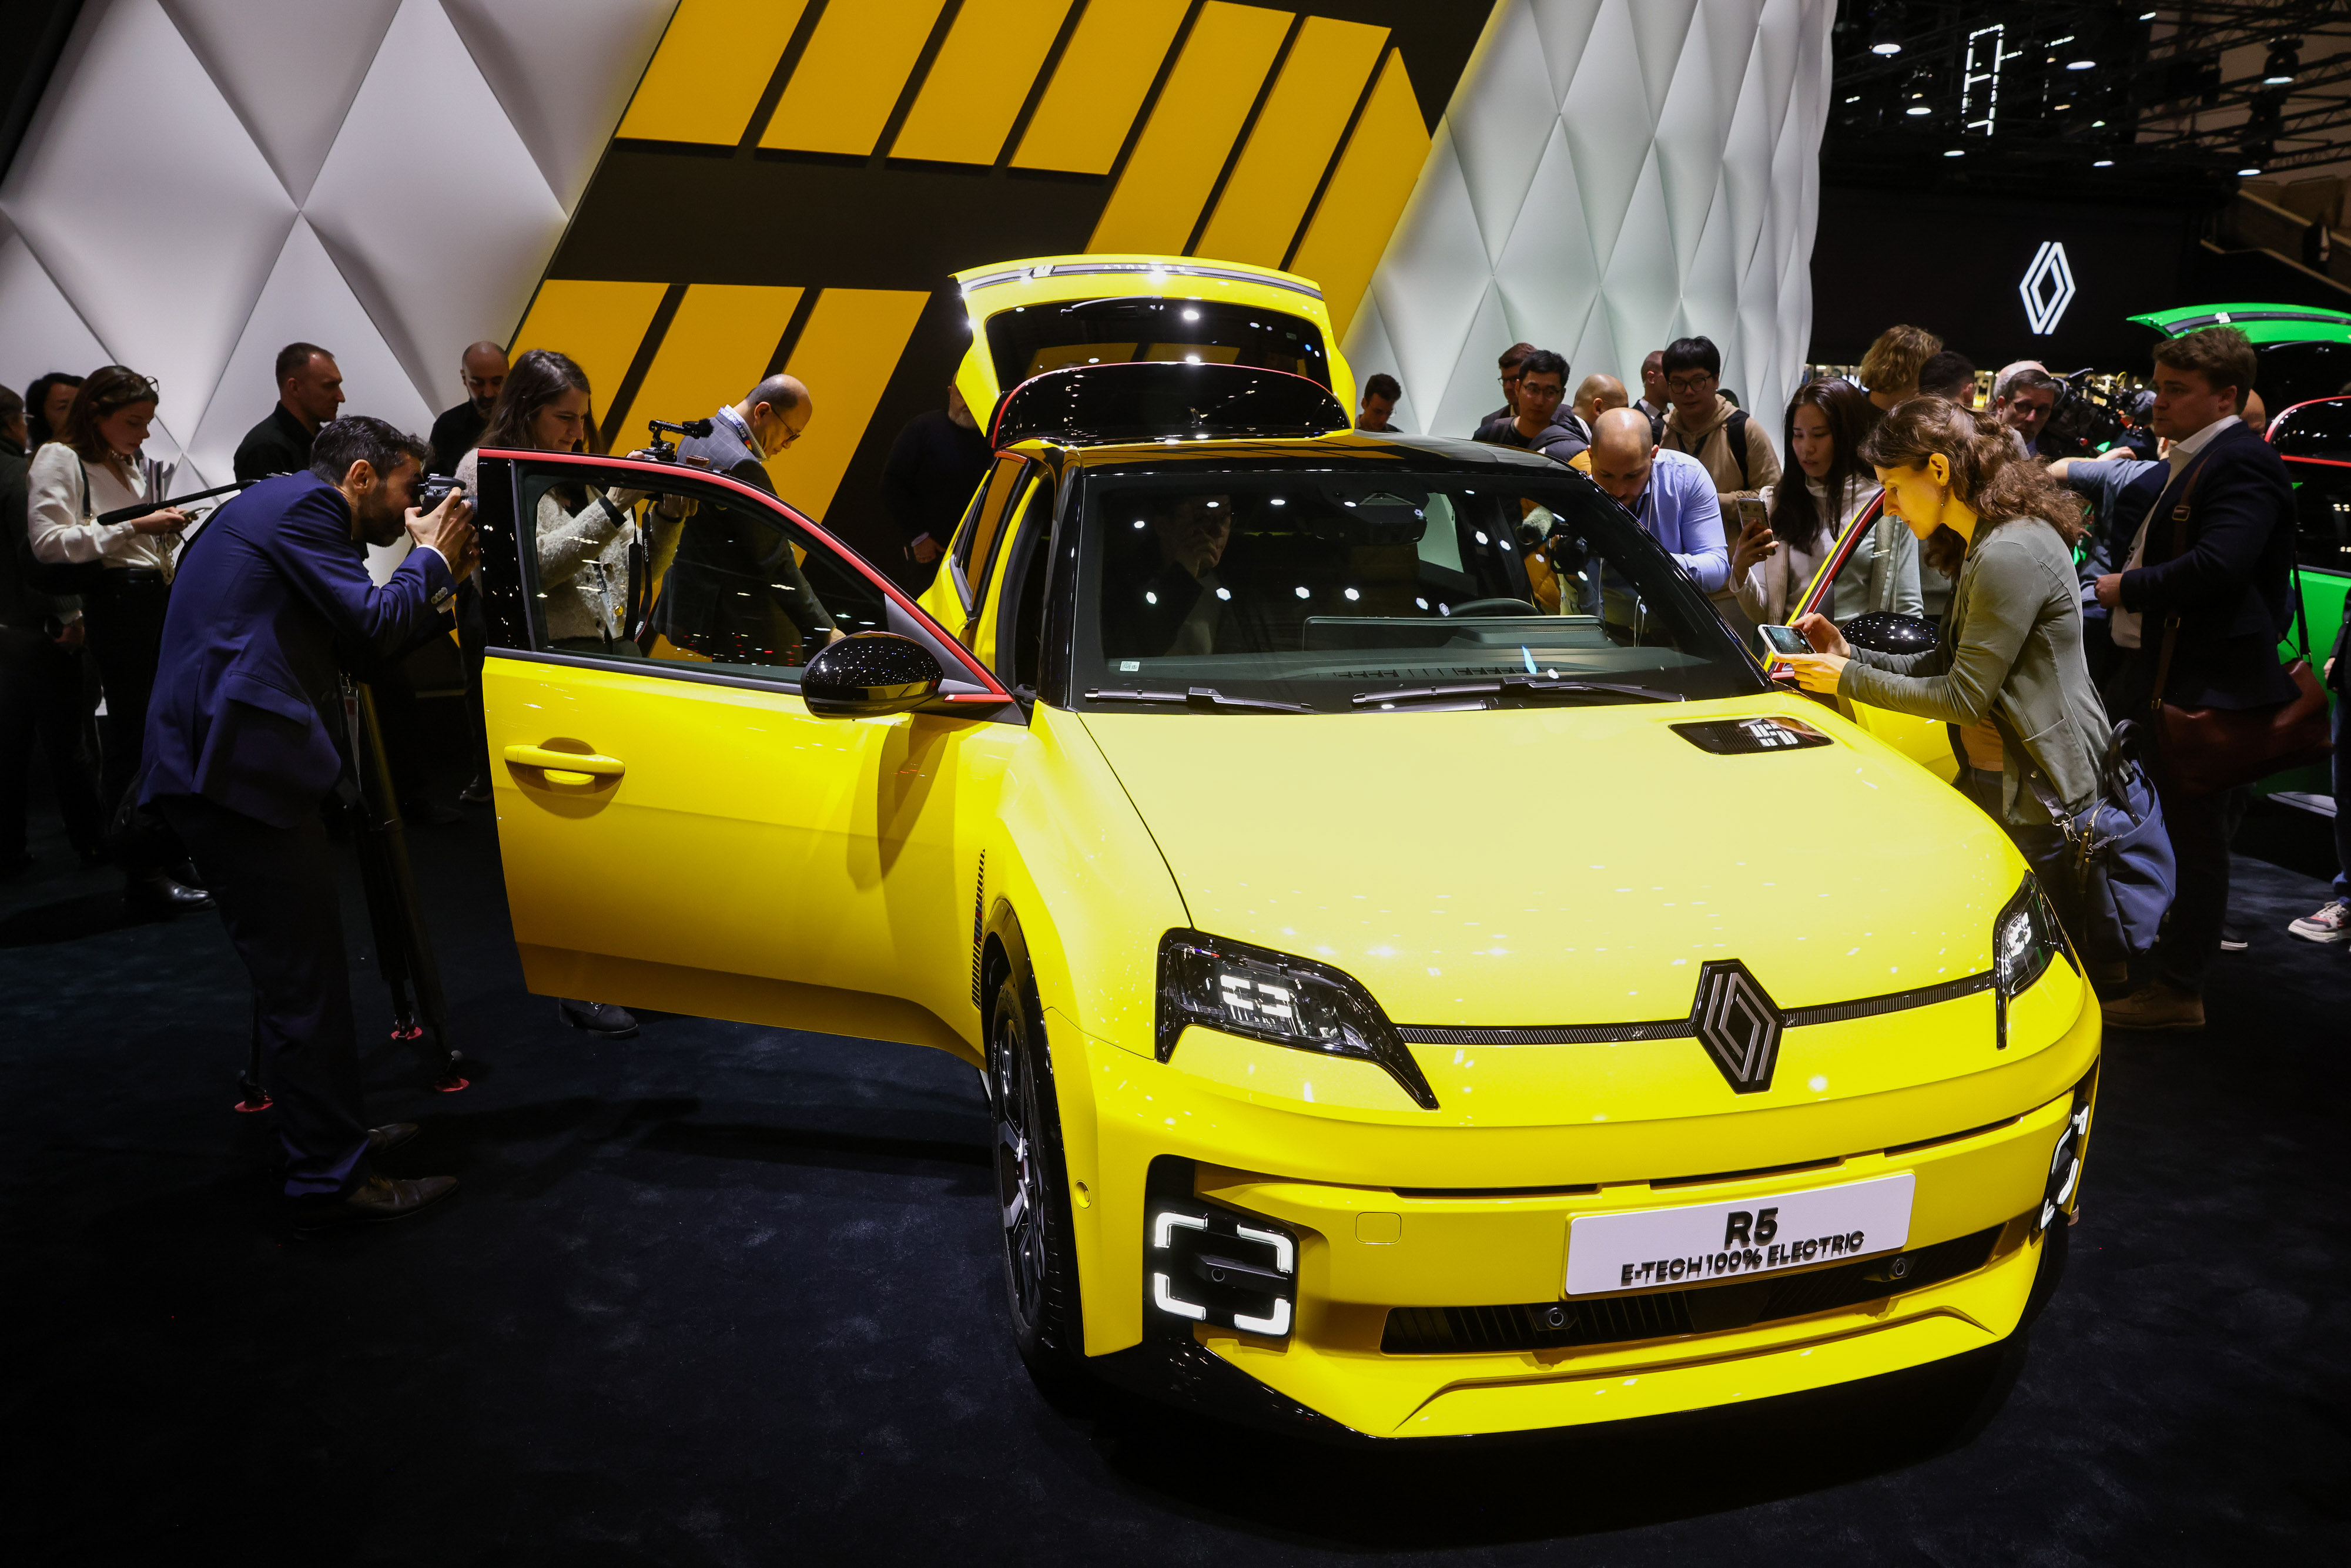 A Renault R5 E-Tech is unveiled during the Geneva Motor Show on Feb. 26.